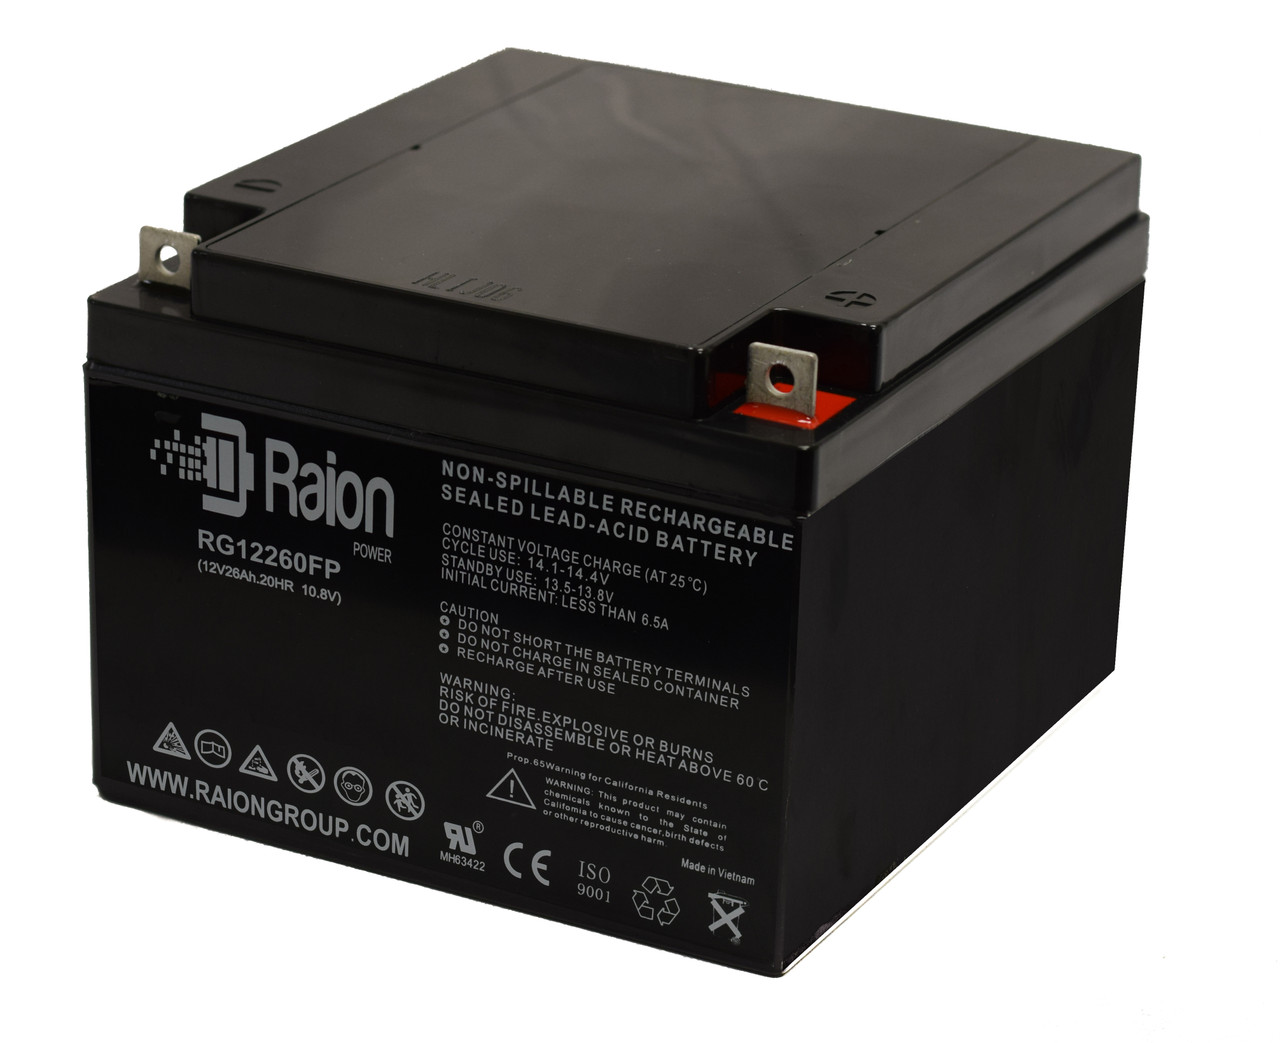 Raion Power Replacement 12V 26Ah Battery for NEATA NT12-26 - 1 Pack